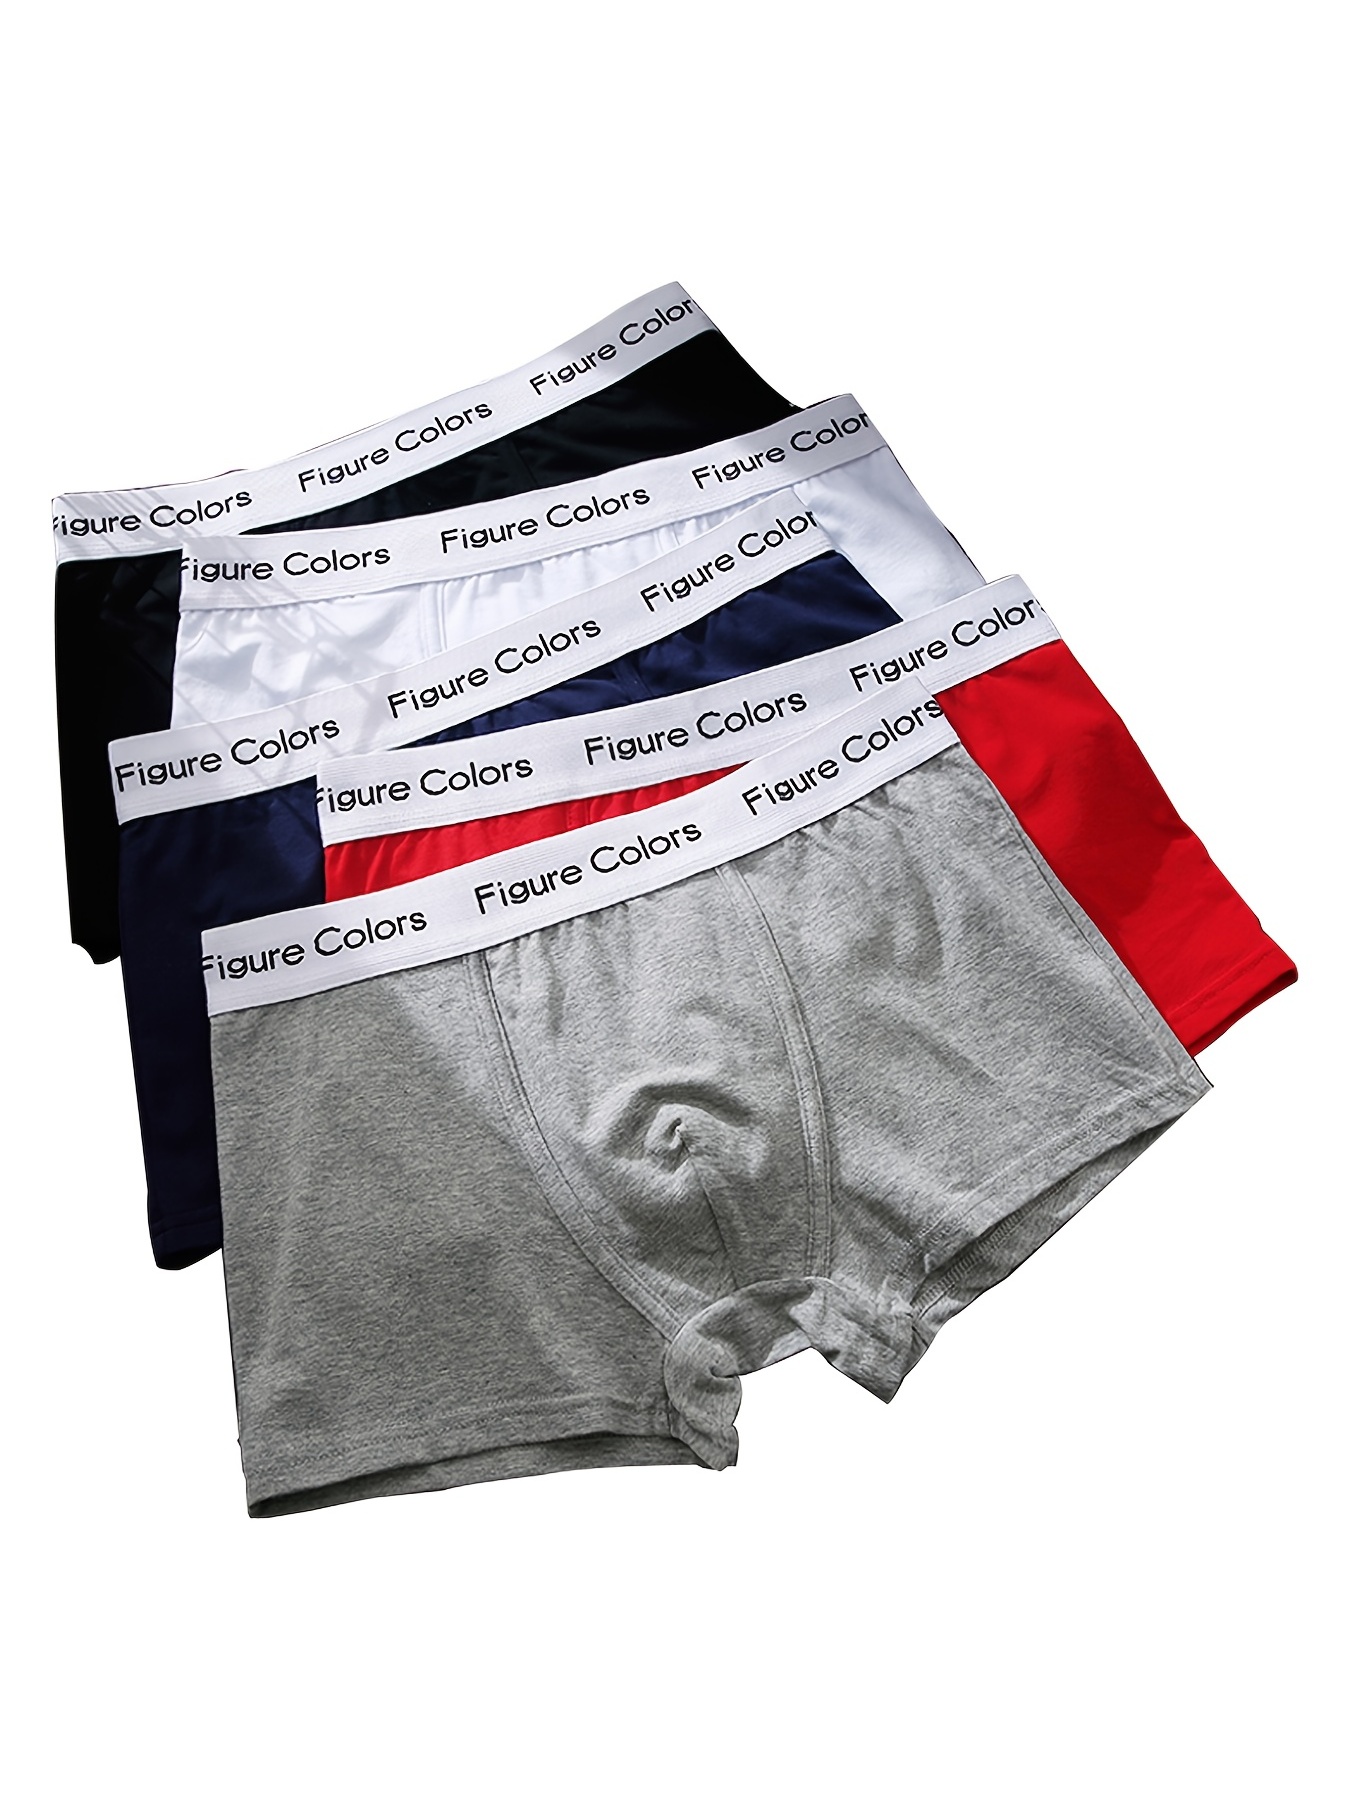 Breathable Modal Cotton Boxers For Youth: Multi Color Options, Trendy Mens  Shorts Cotton Underwear Men From Coralineny, $7.38